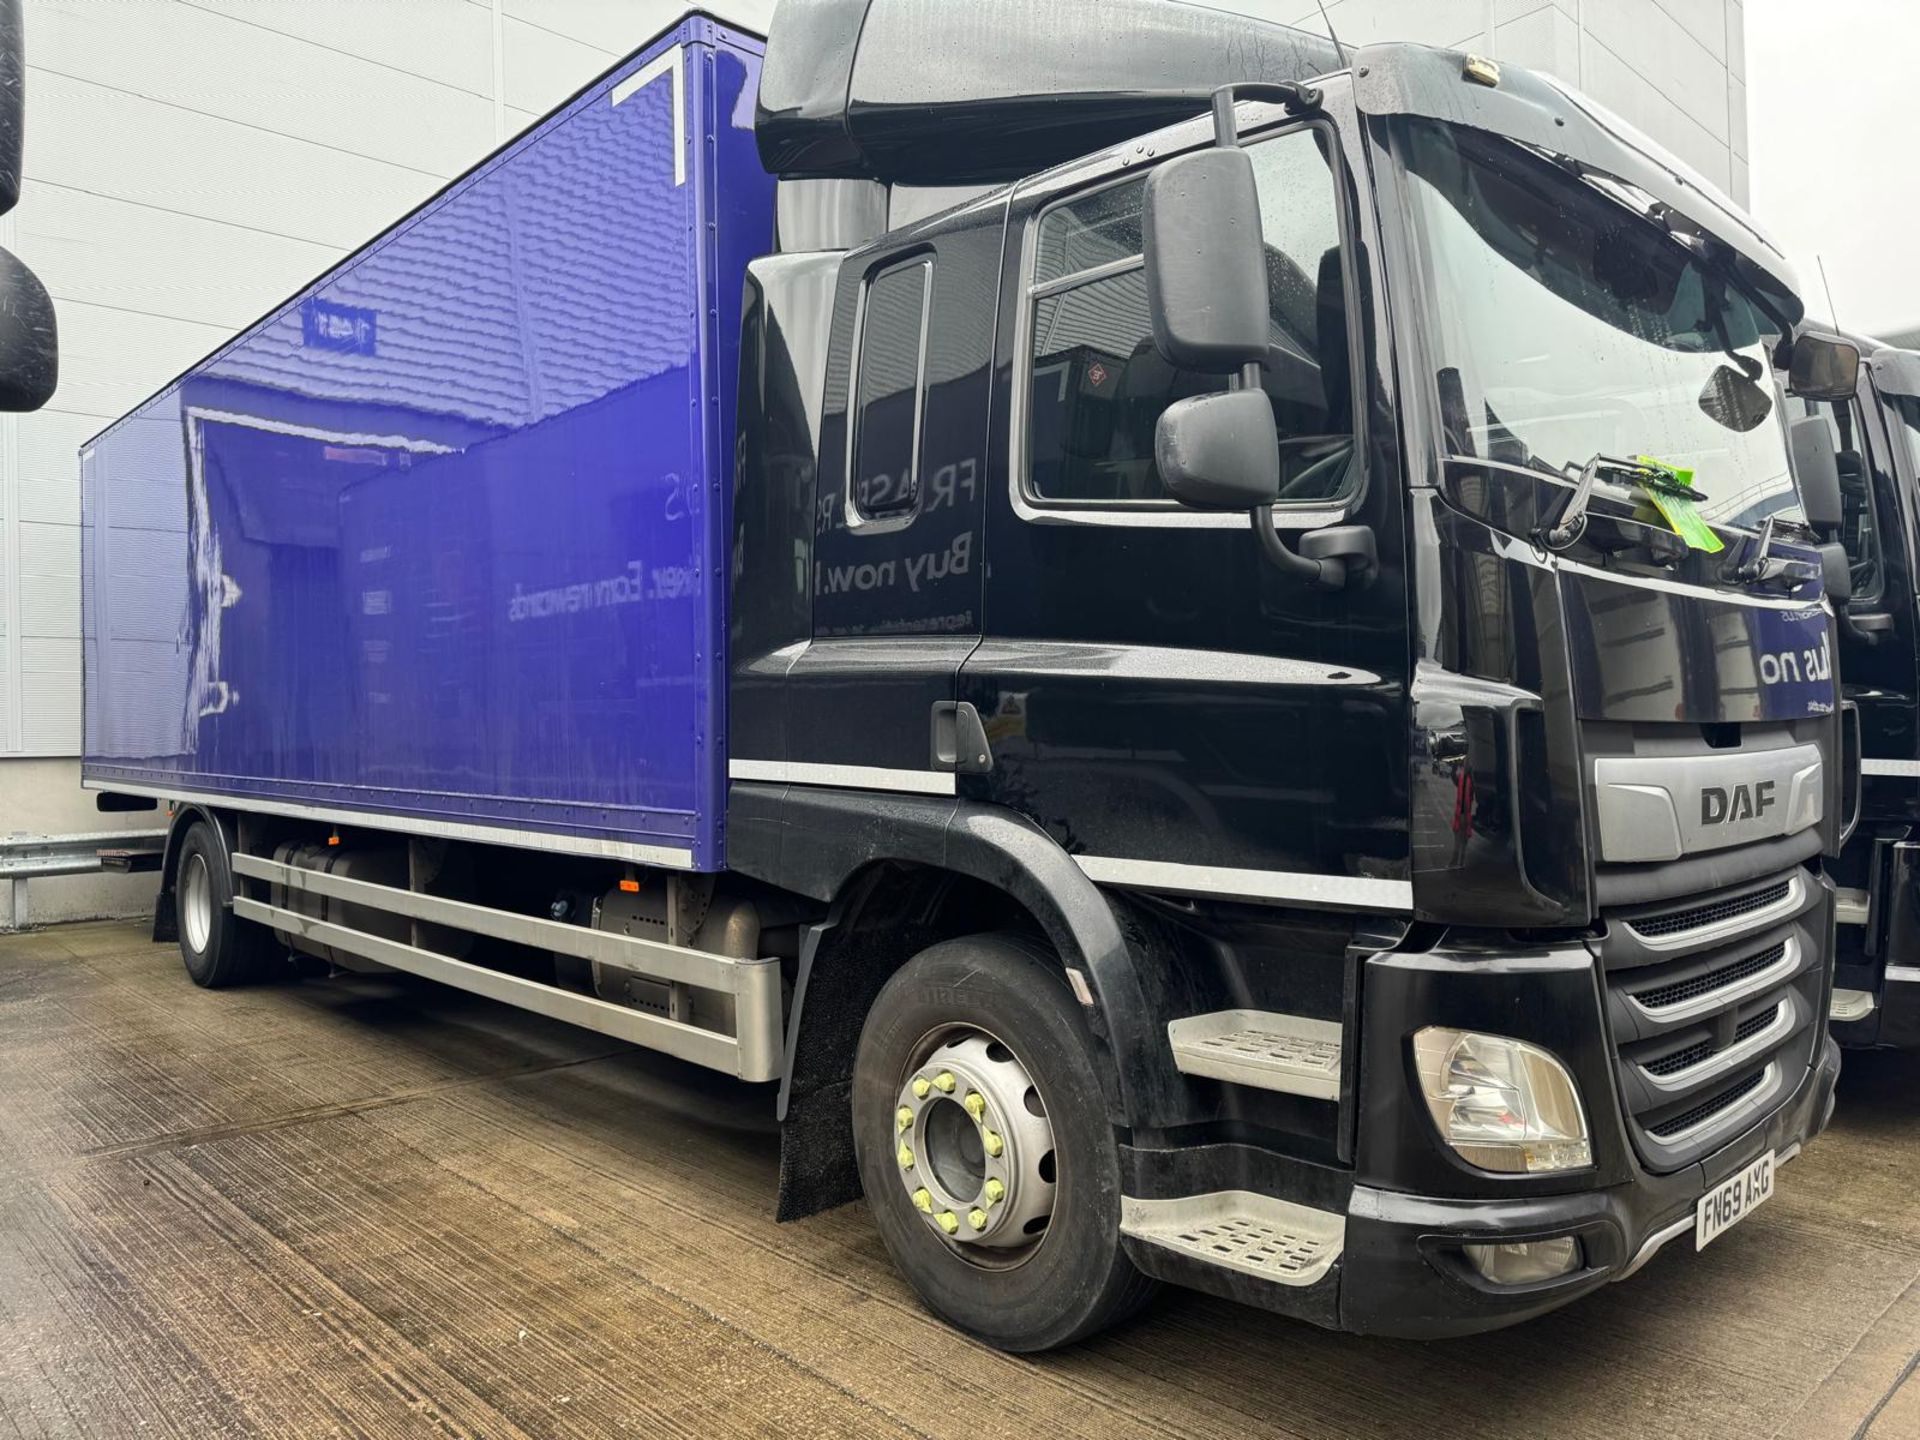 2019, DAF CF 260 FA (Ex-Fleet Owned & Maintained) - FN69 AXG (18 Ton Rigid Truck with Tail Lift) - Image 3 of 16